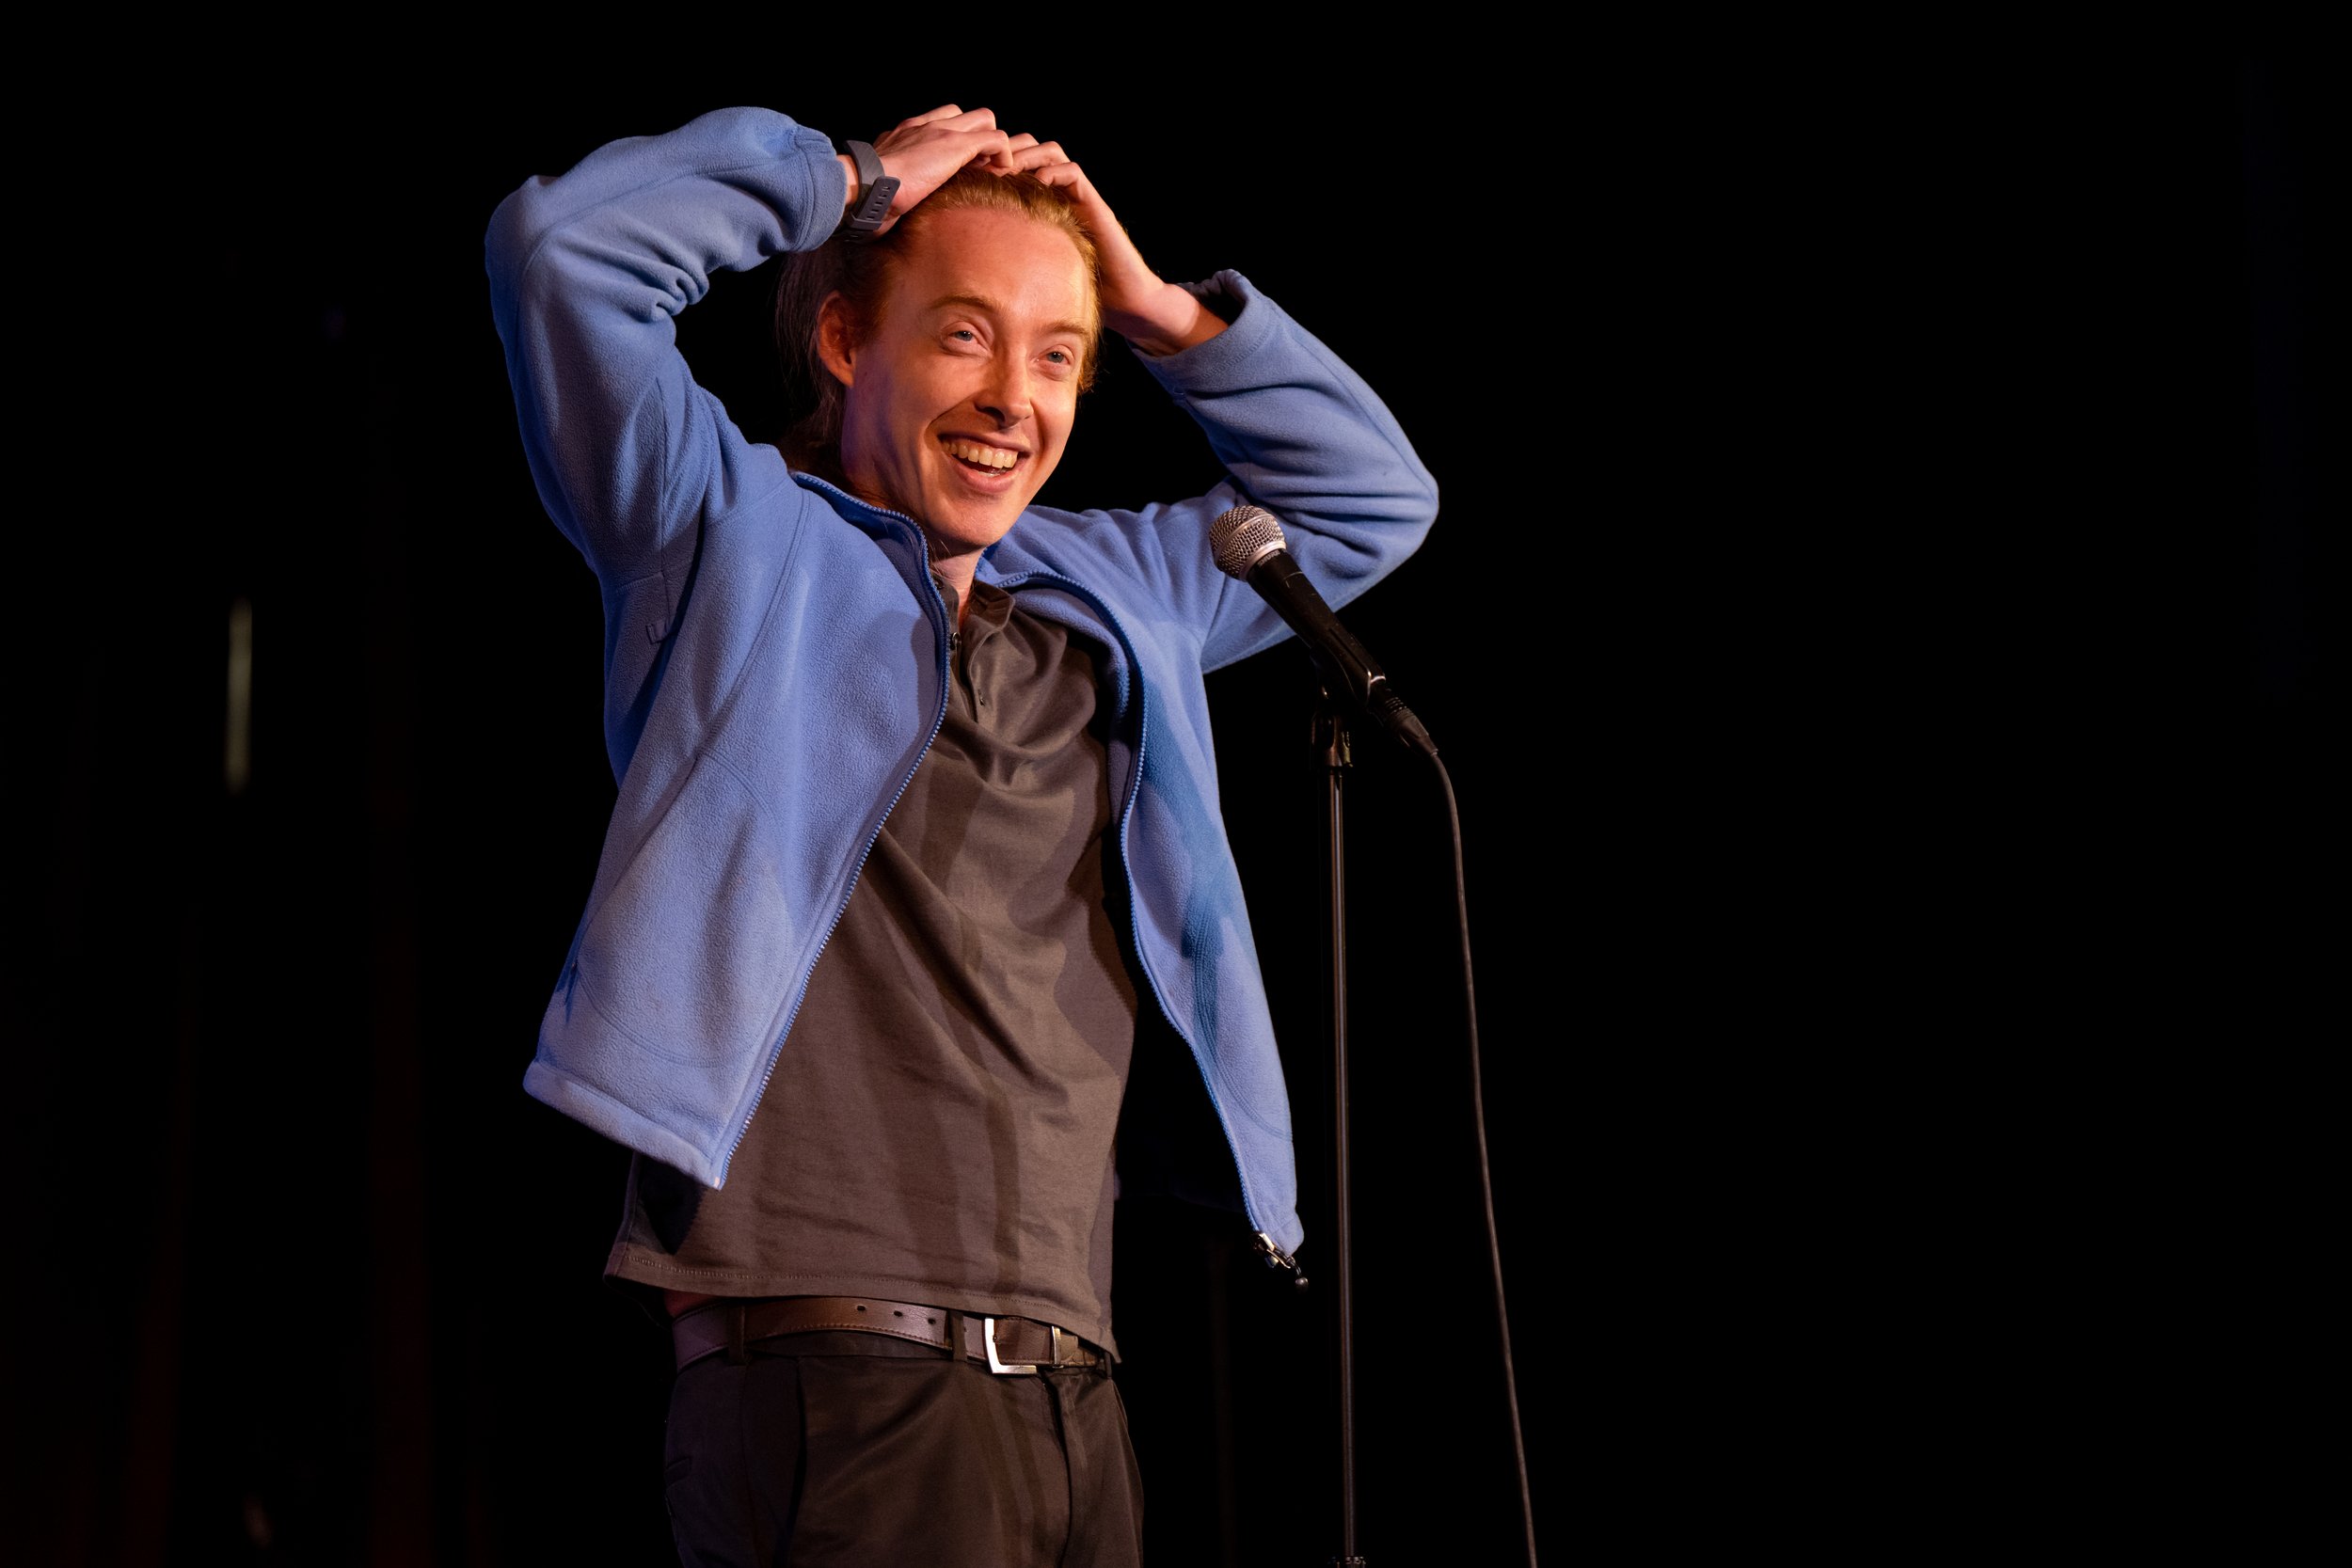  SMBC cartoonist and storyteller Zach Weinersmith on stage at The Bell House in Brooklyn, NY.  